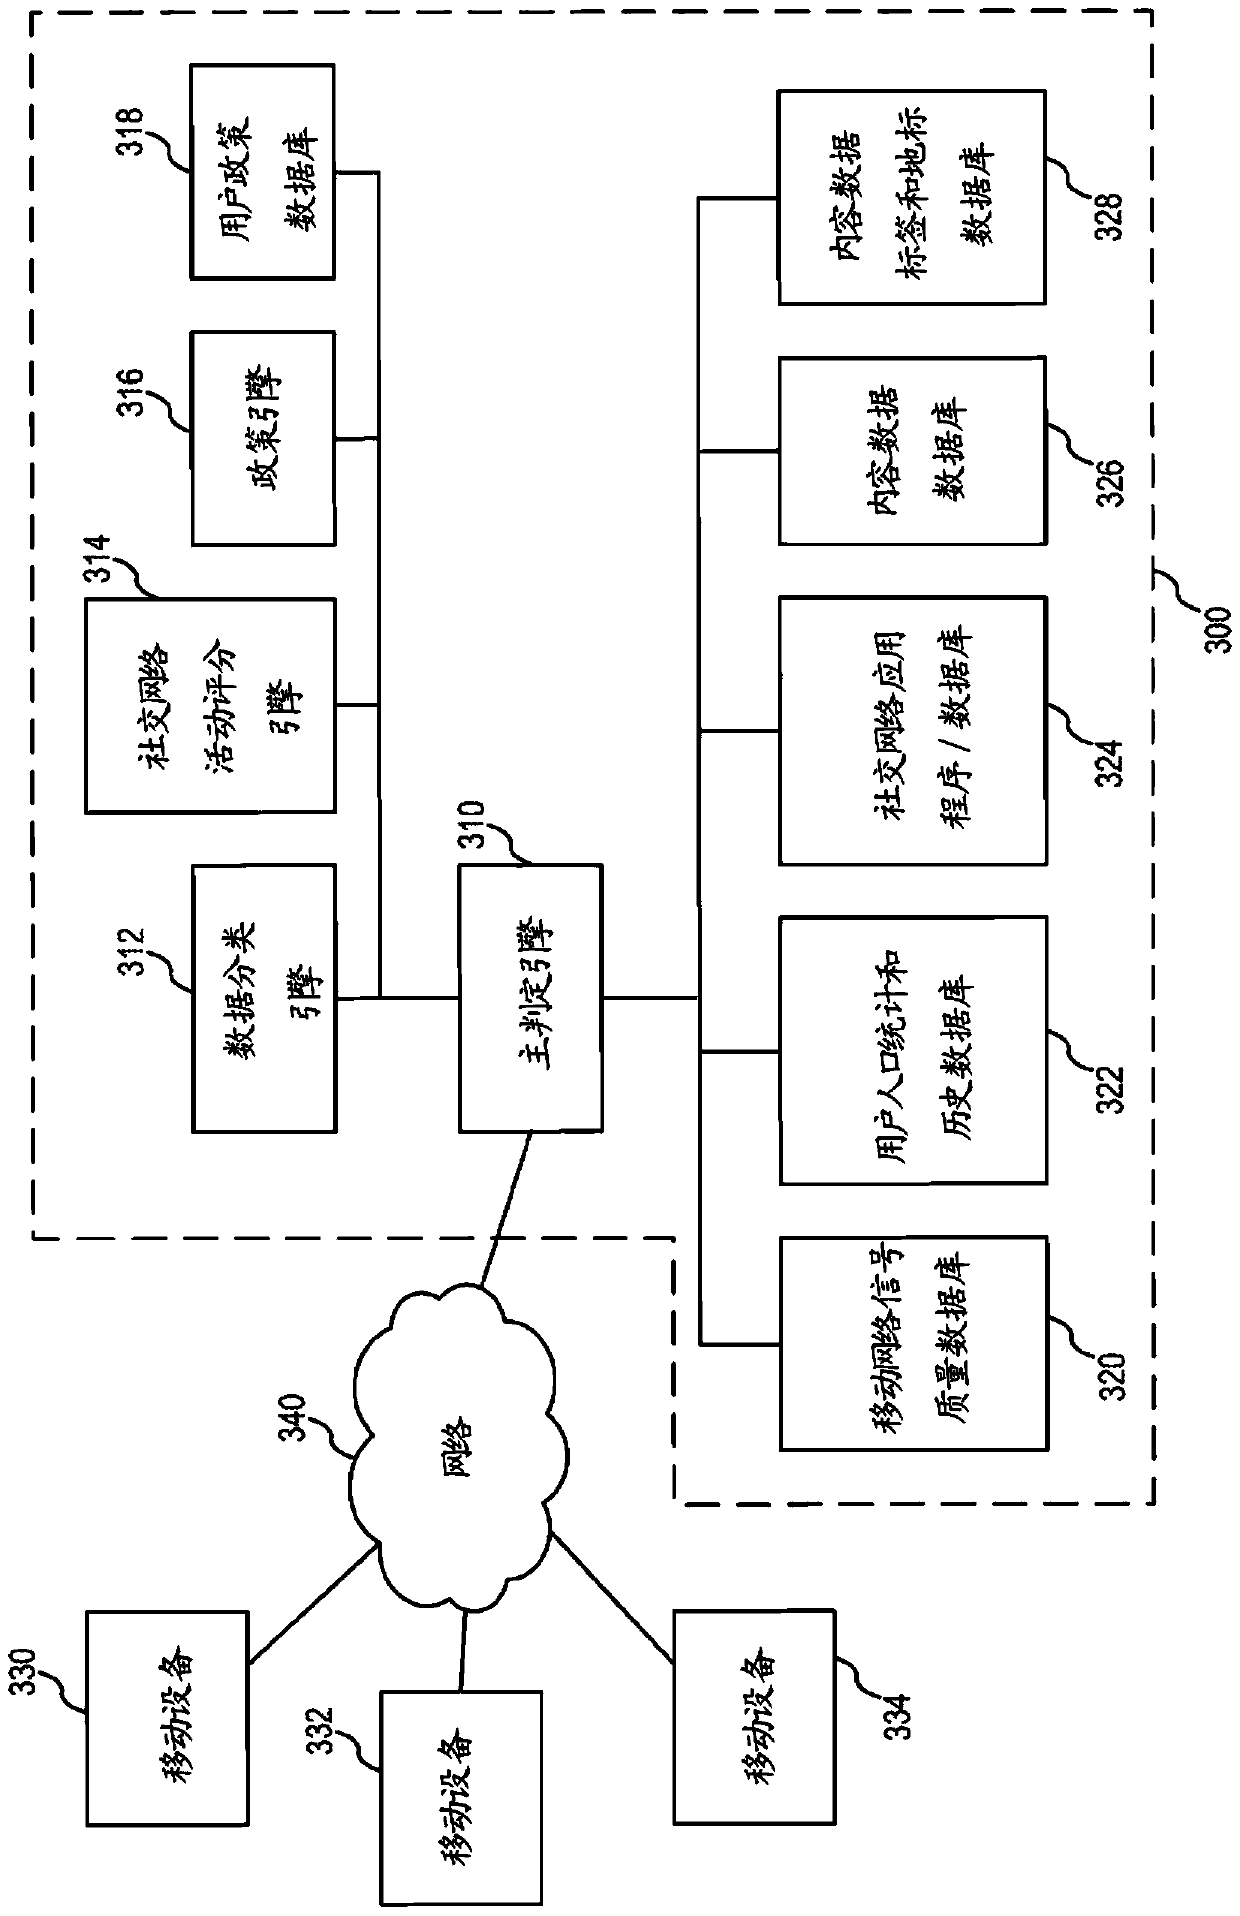 Method and apparatus for prefetching and storing content data in a mobile device